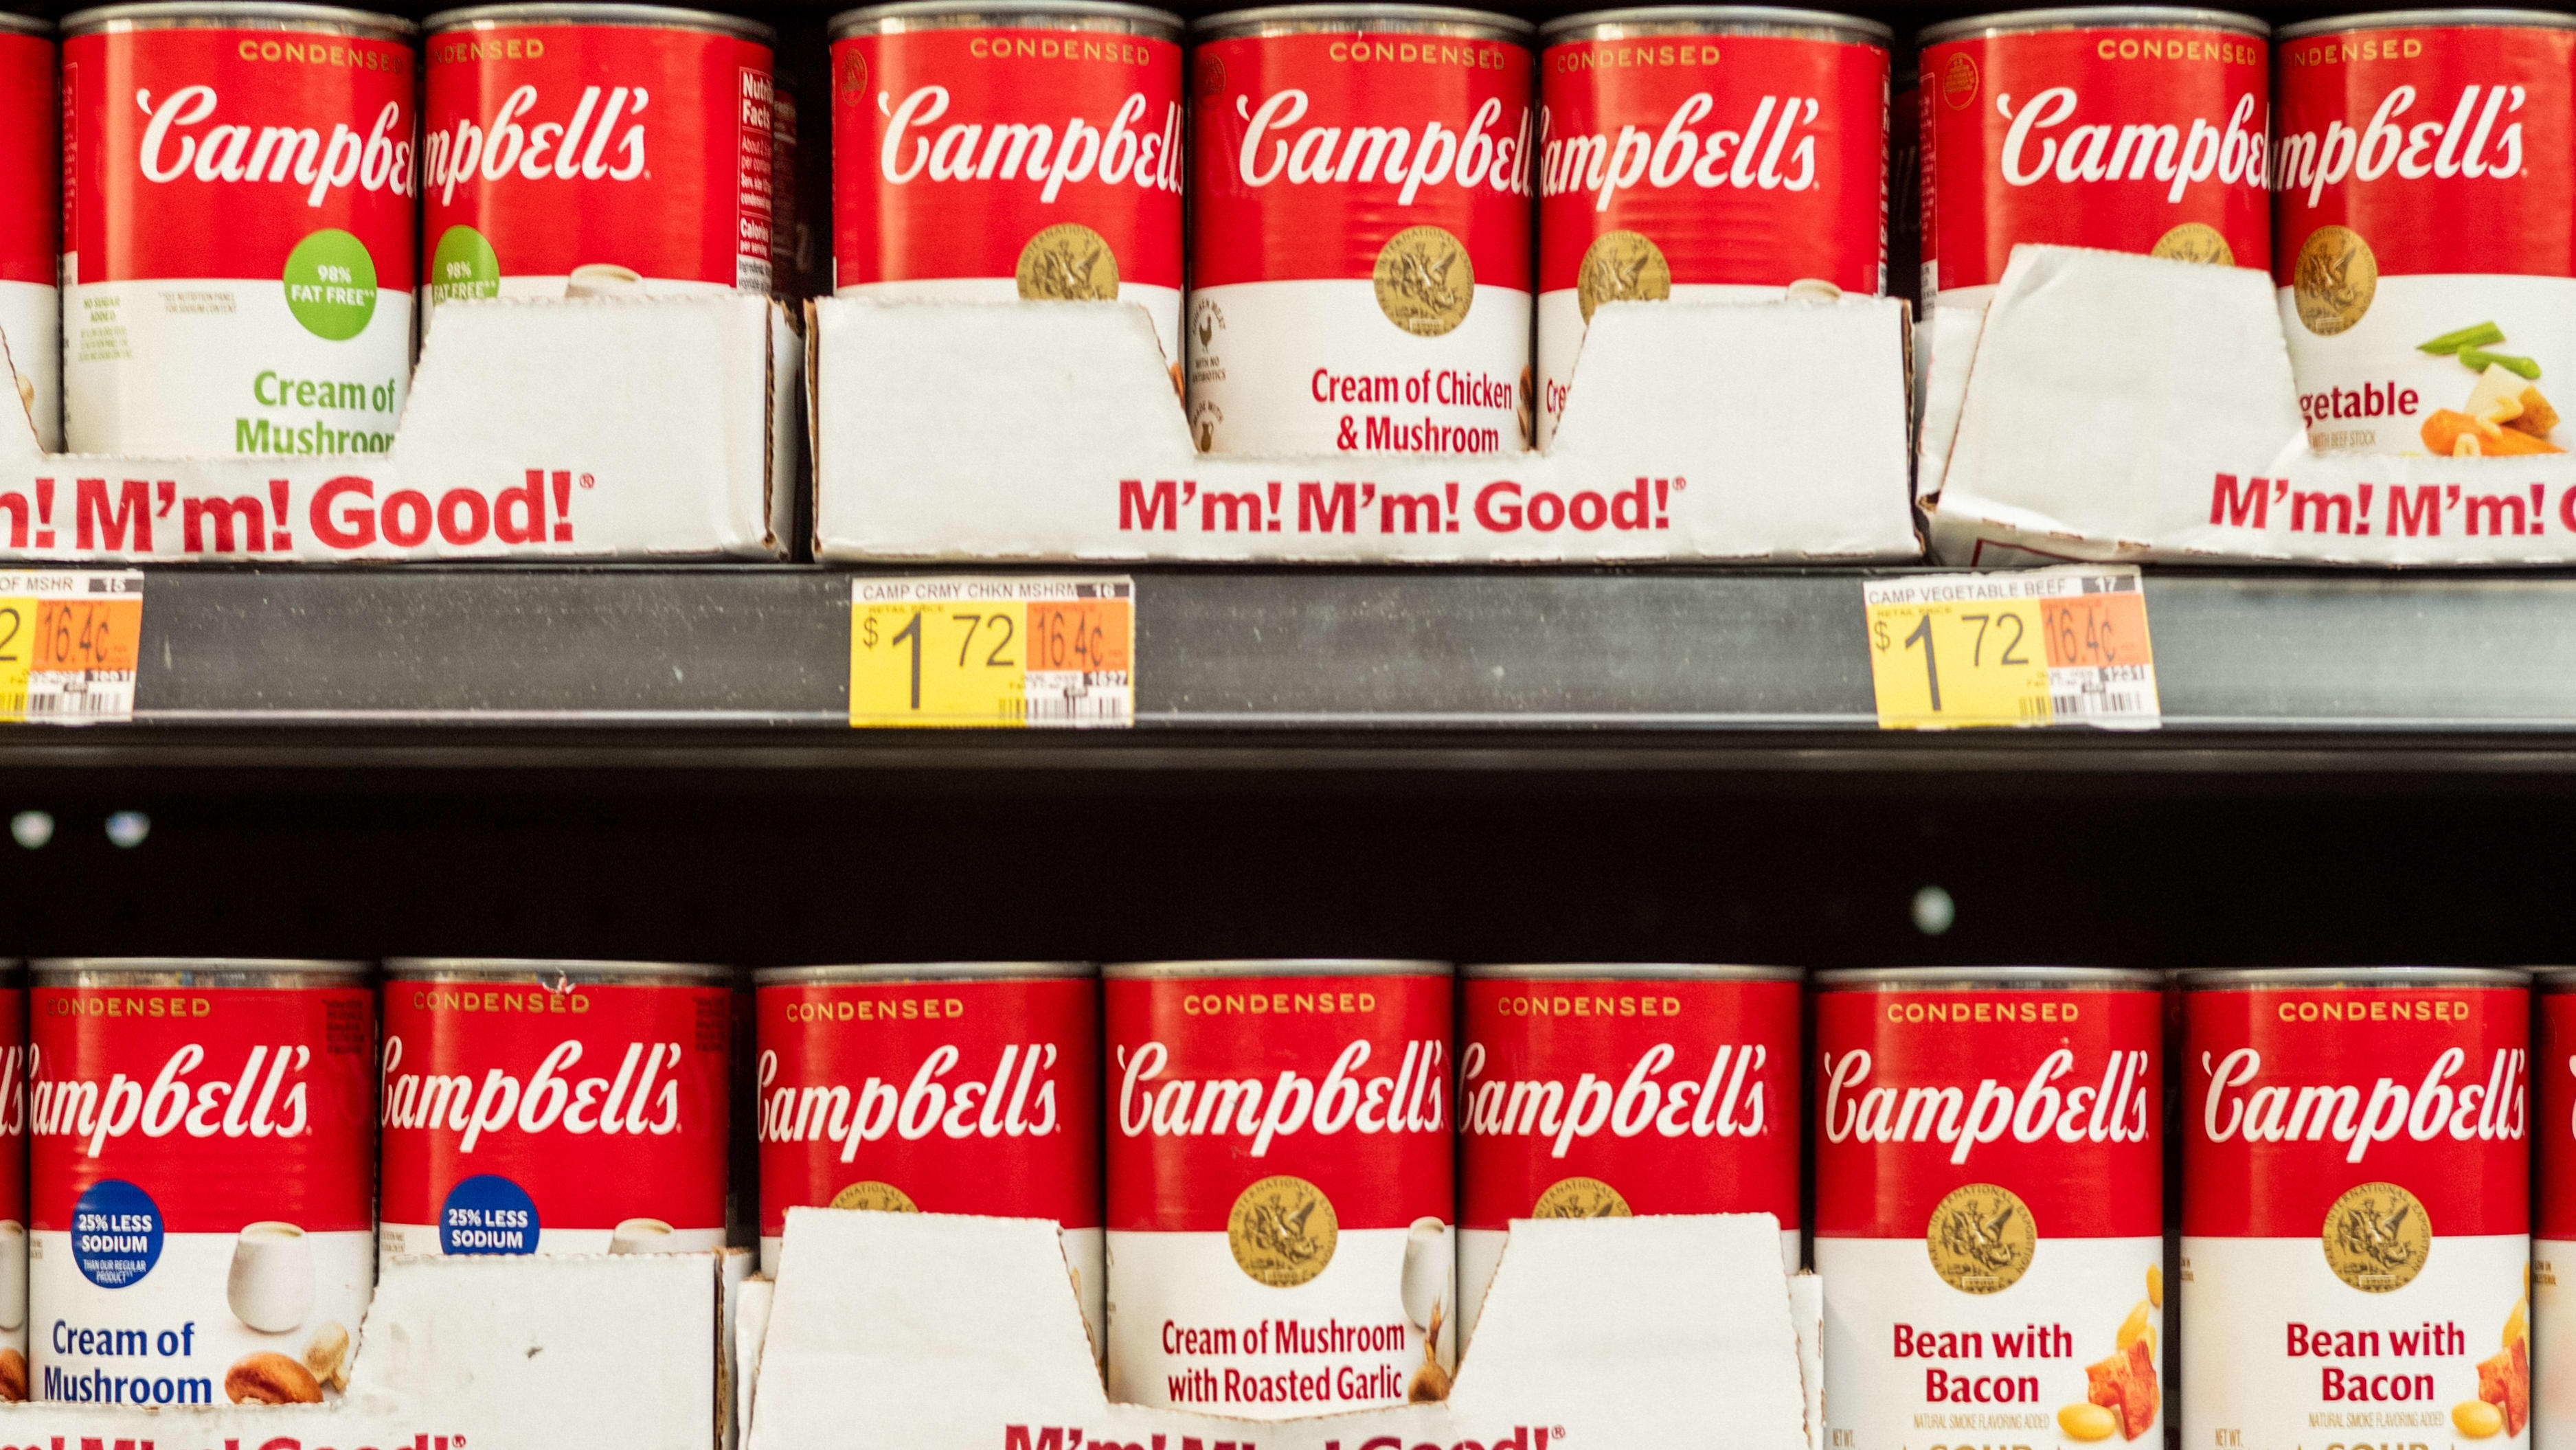 Campbell Soup Spends $2.7 Billion on Pasta Sauce - McGraw-Hill Introduction  to Business